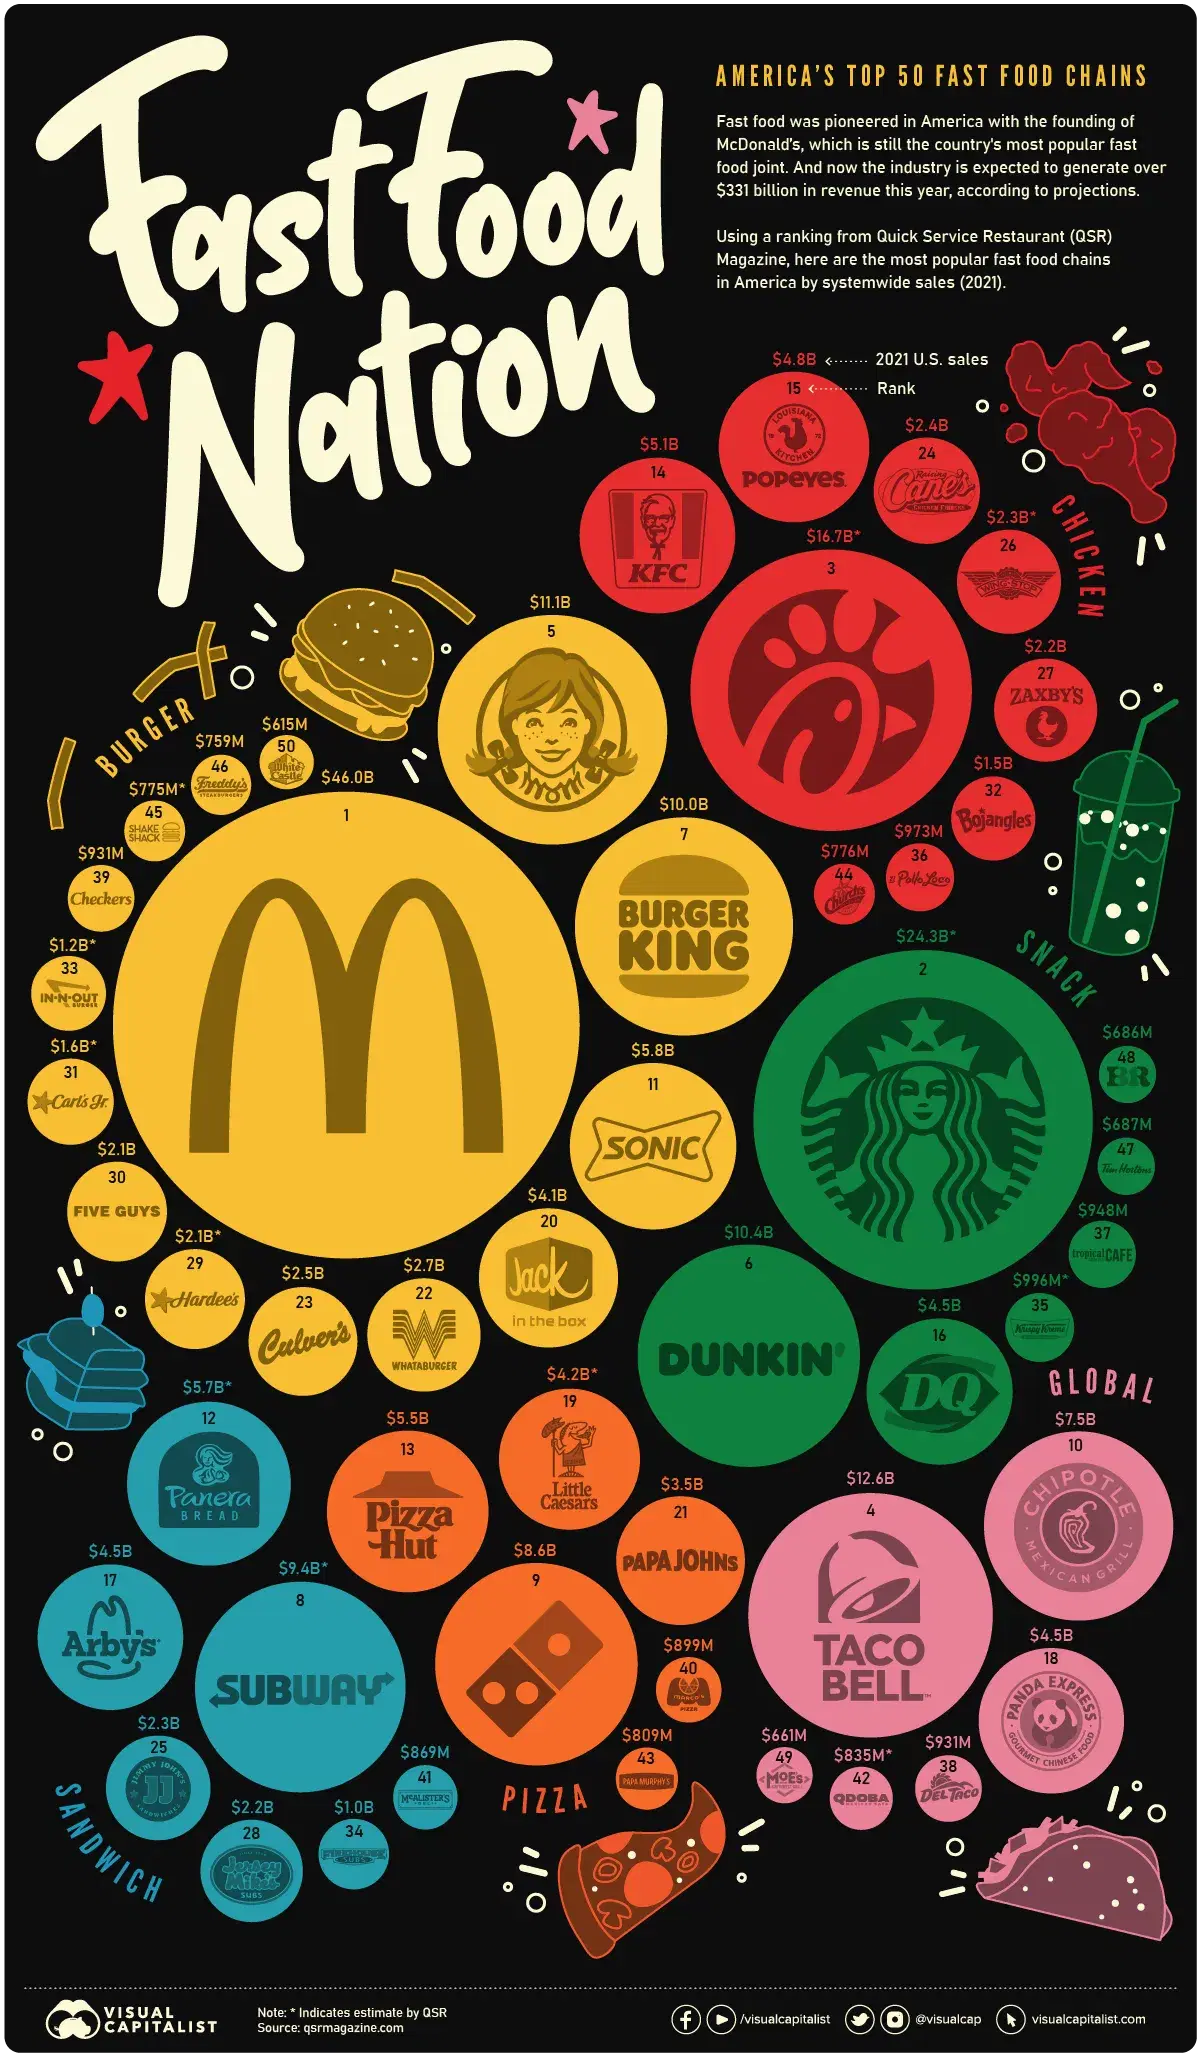 The Most Popular Fast Food Brands in America